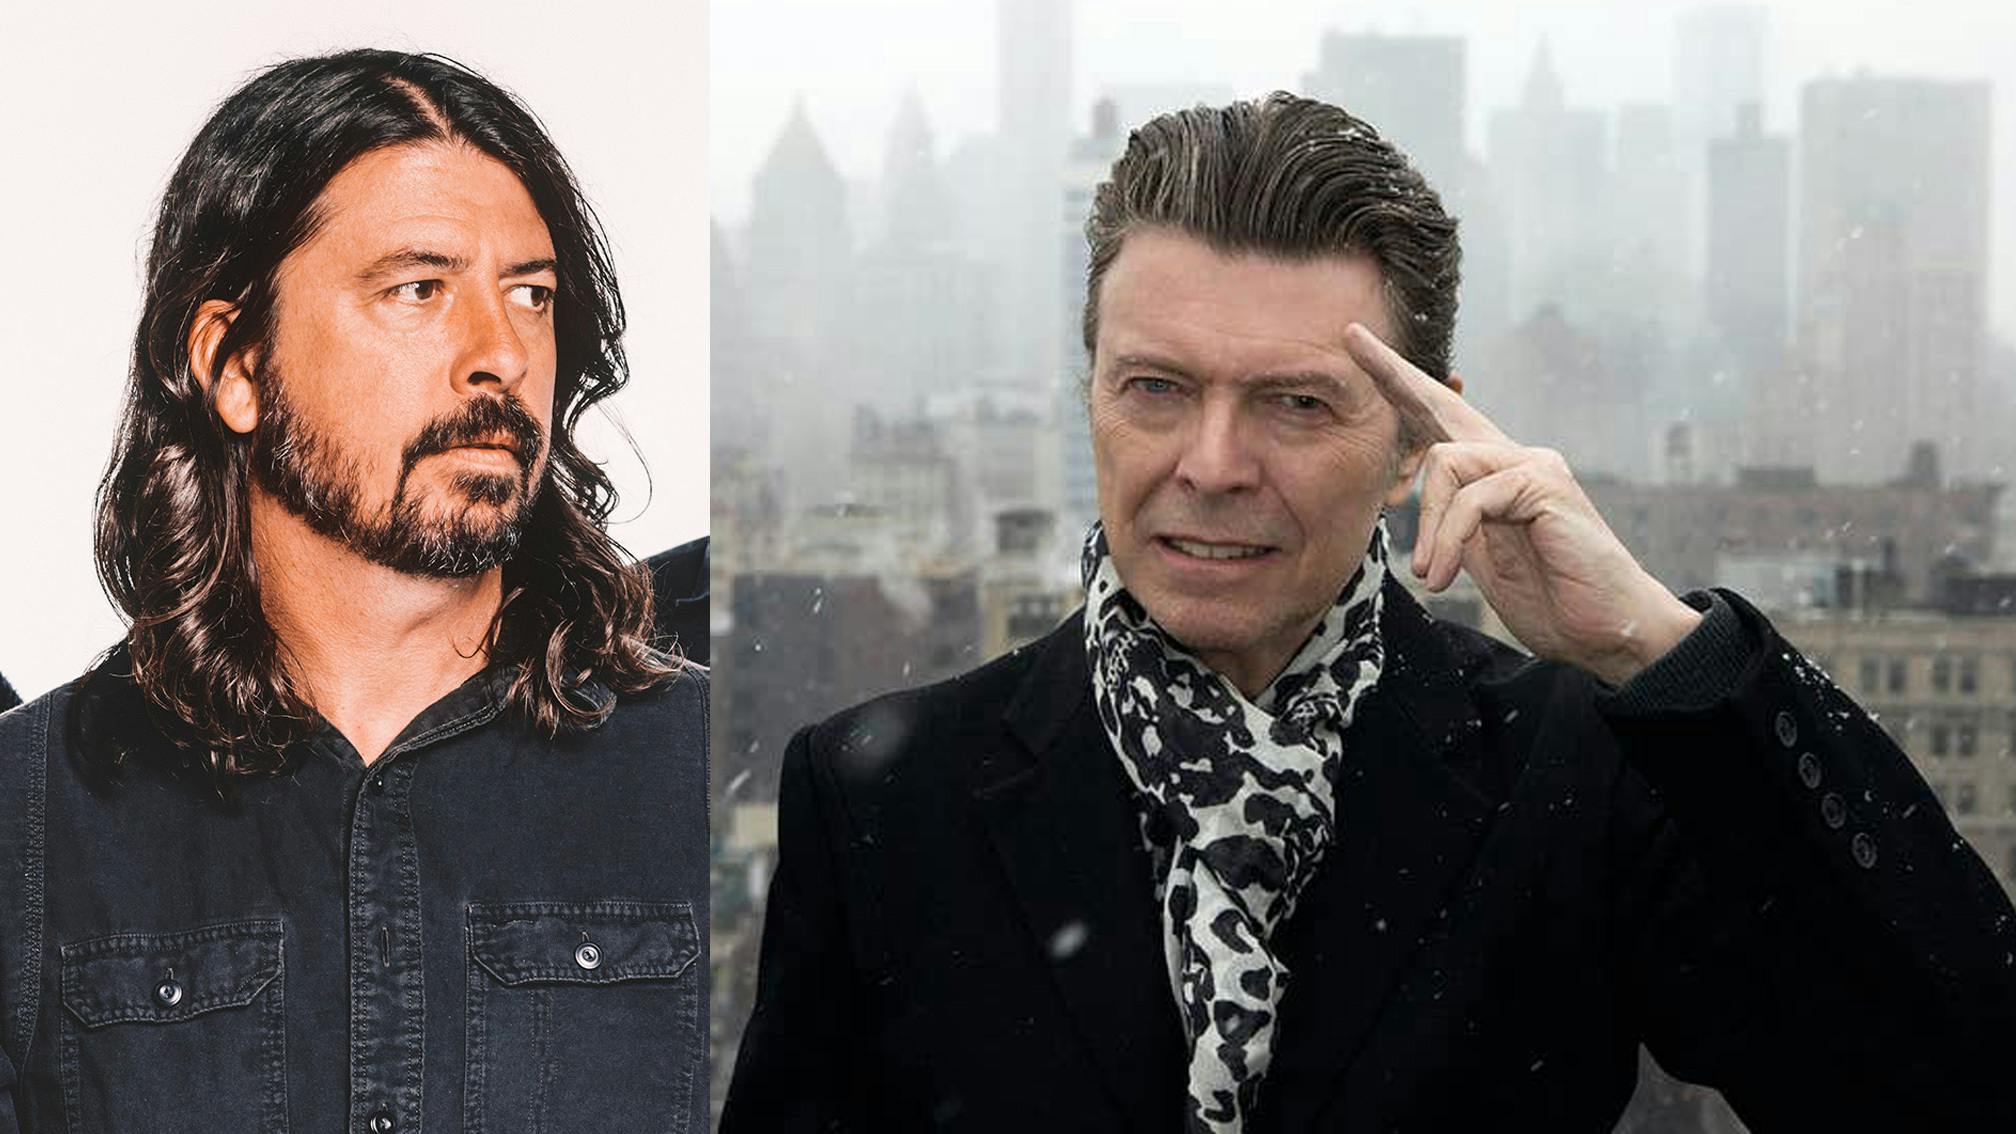 Dave Grohl Remembers The Time David Bowie Told Him To "F*ck Off"